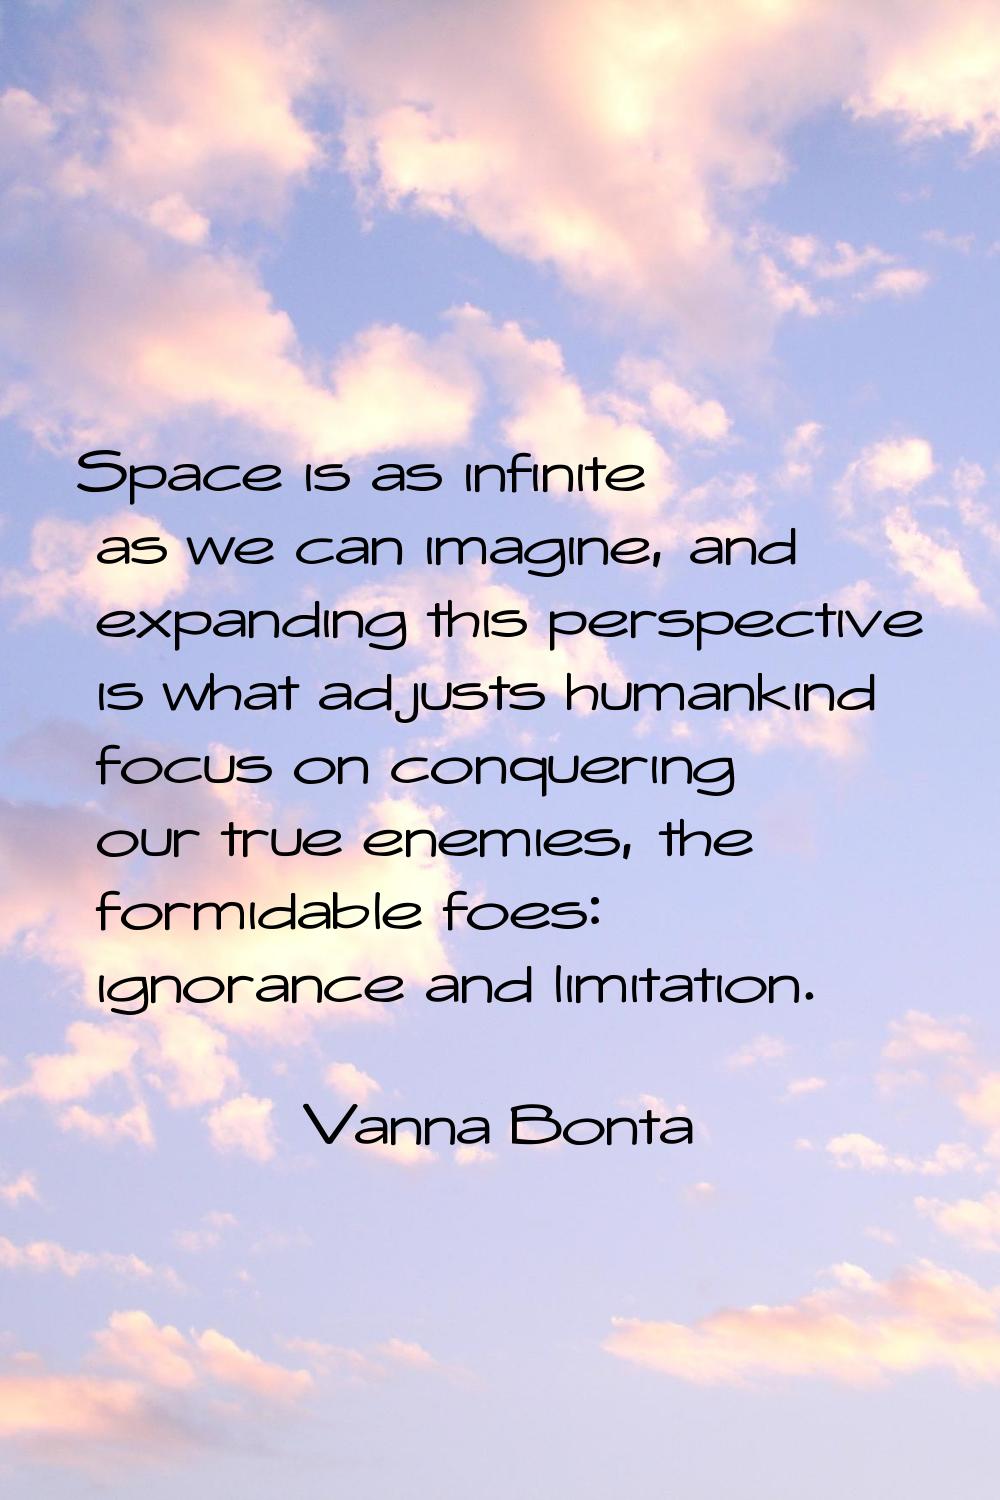 Space is as infinite as we can imagine, and expanding this perspective is what adjusts humankind fo